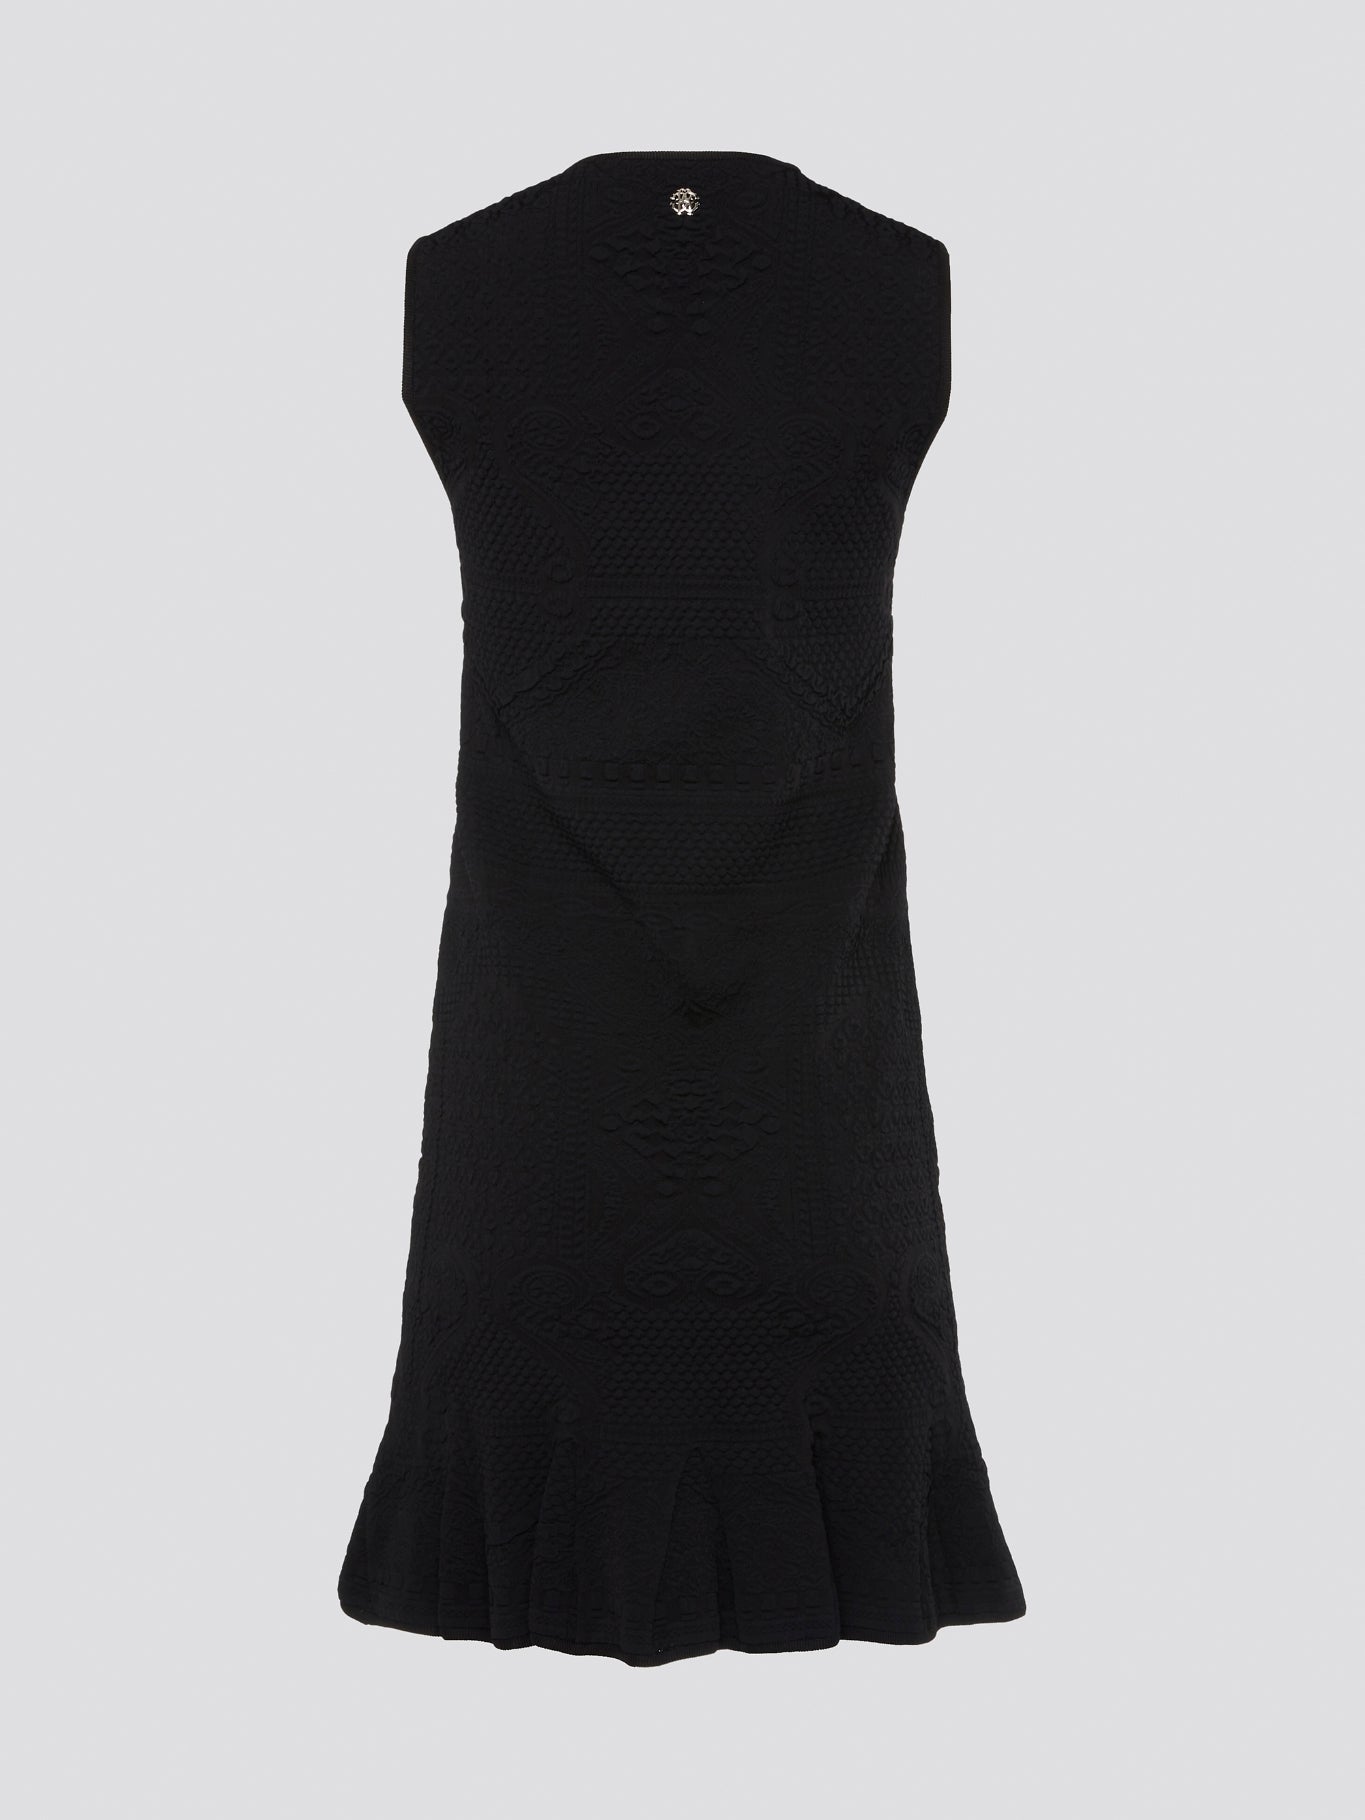 Get ready to turn heads with this stunning black sleeveless mini dress from Roberto Cavalli. This sleek and stylish design features a flattering silhouette that hugs your curves in all the right places. Whether you're hitting the town or attending a special event, this dress is sure to make a statement and elevate your look to the next level.